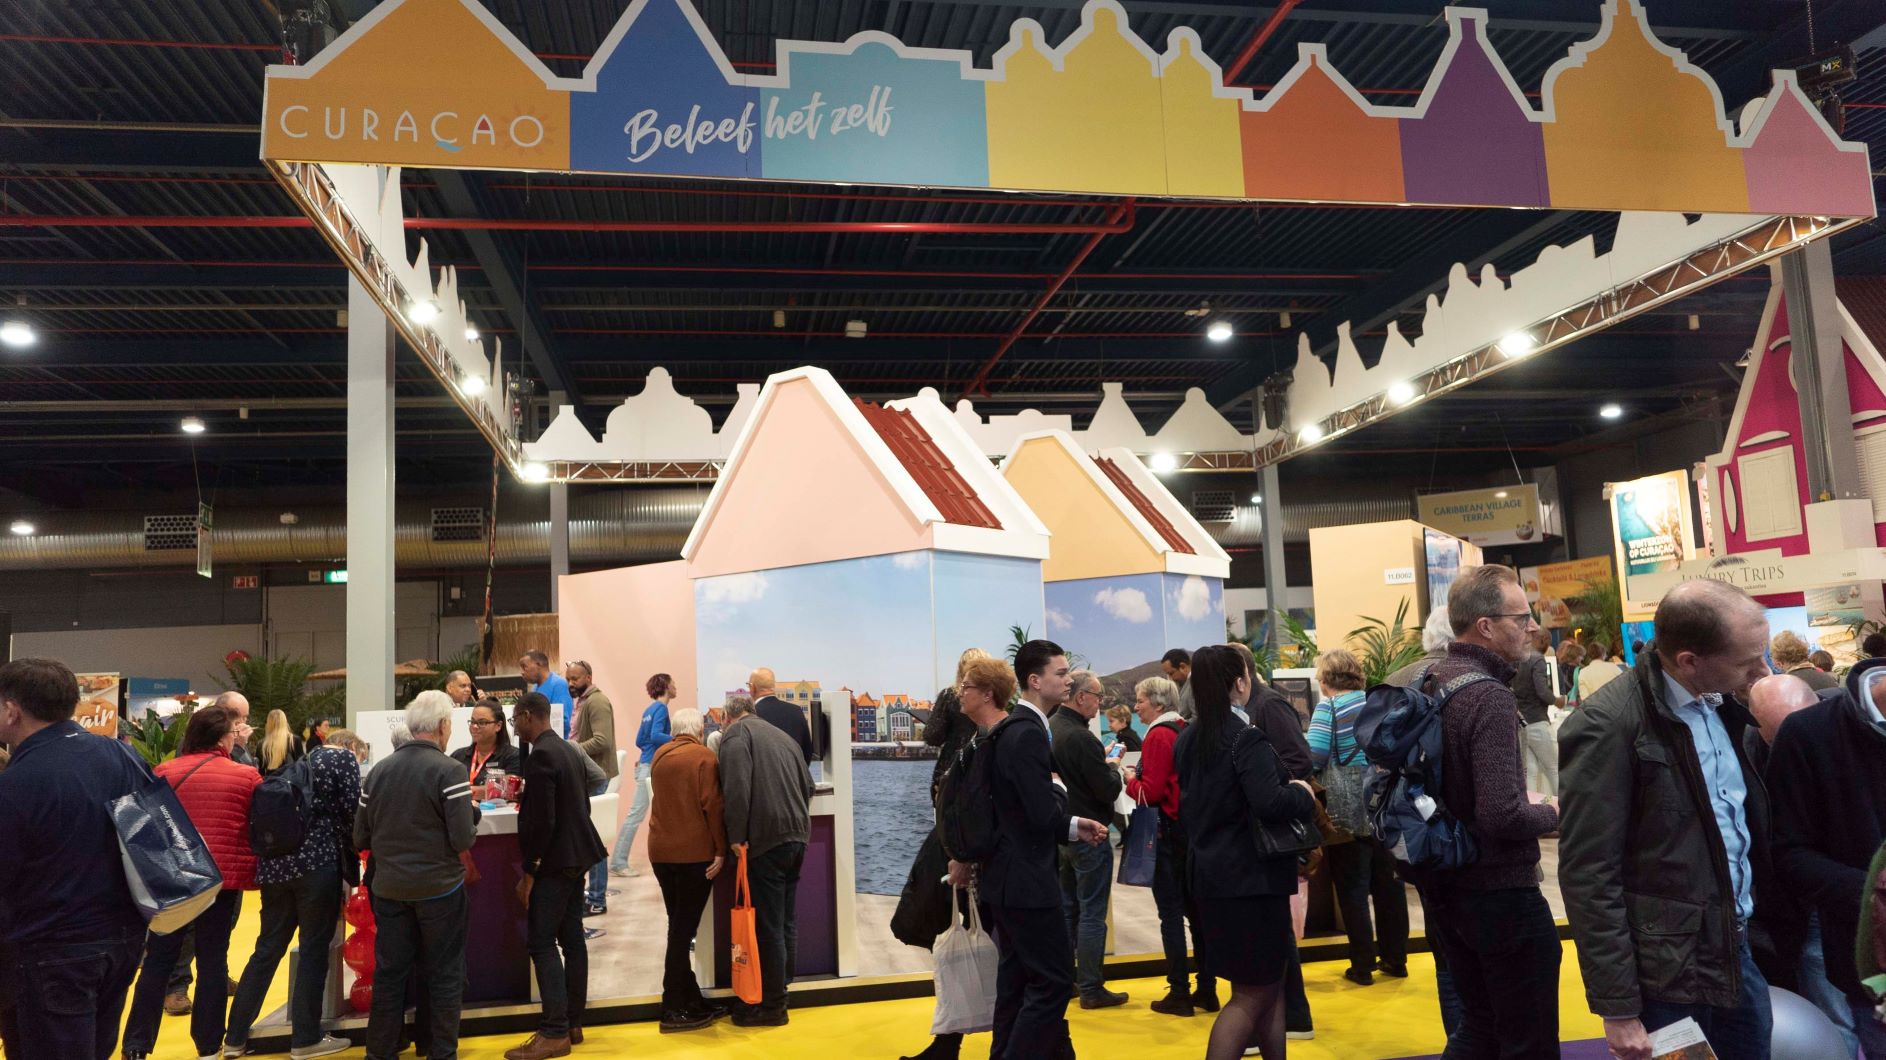 Curaçao at Tourism and Leisure Fair in Utrecht